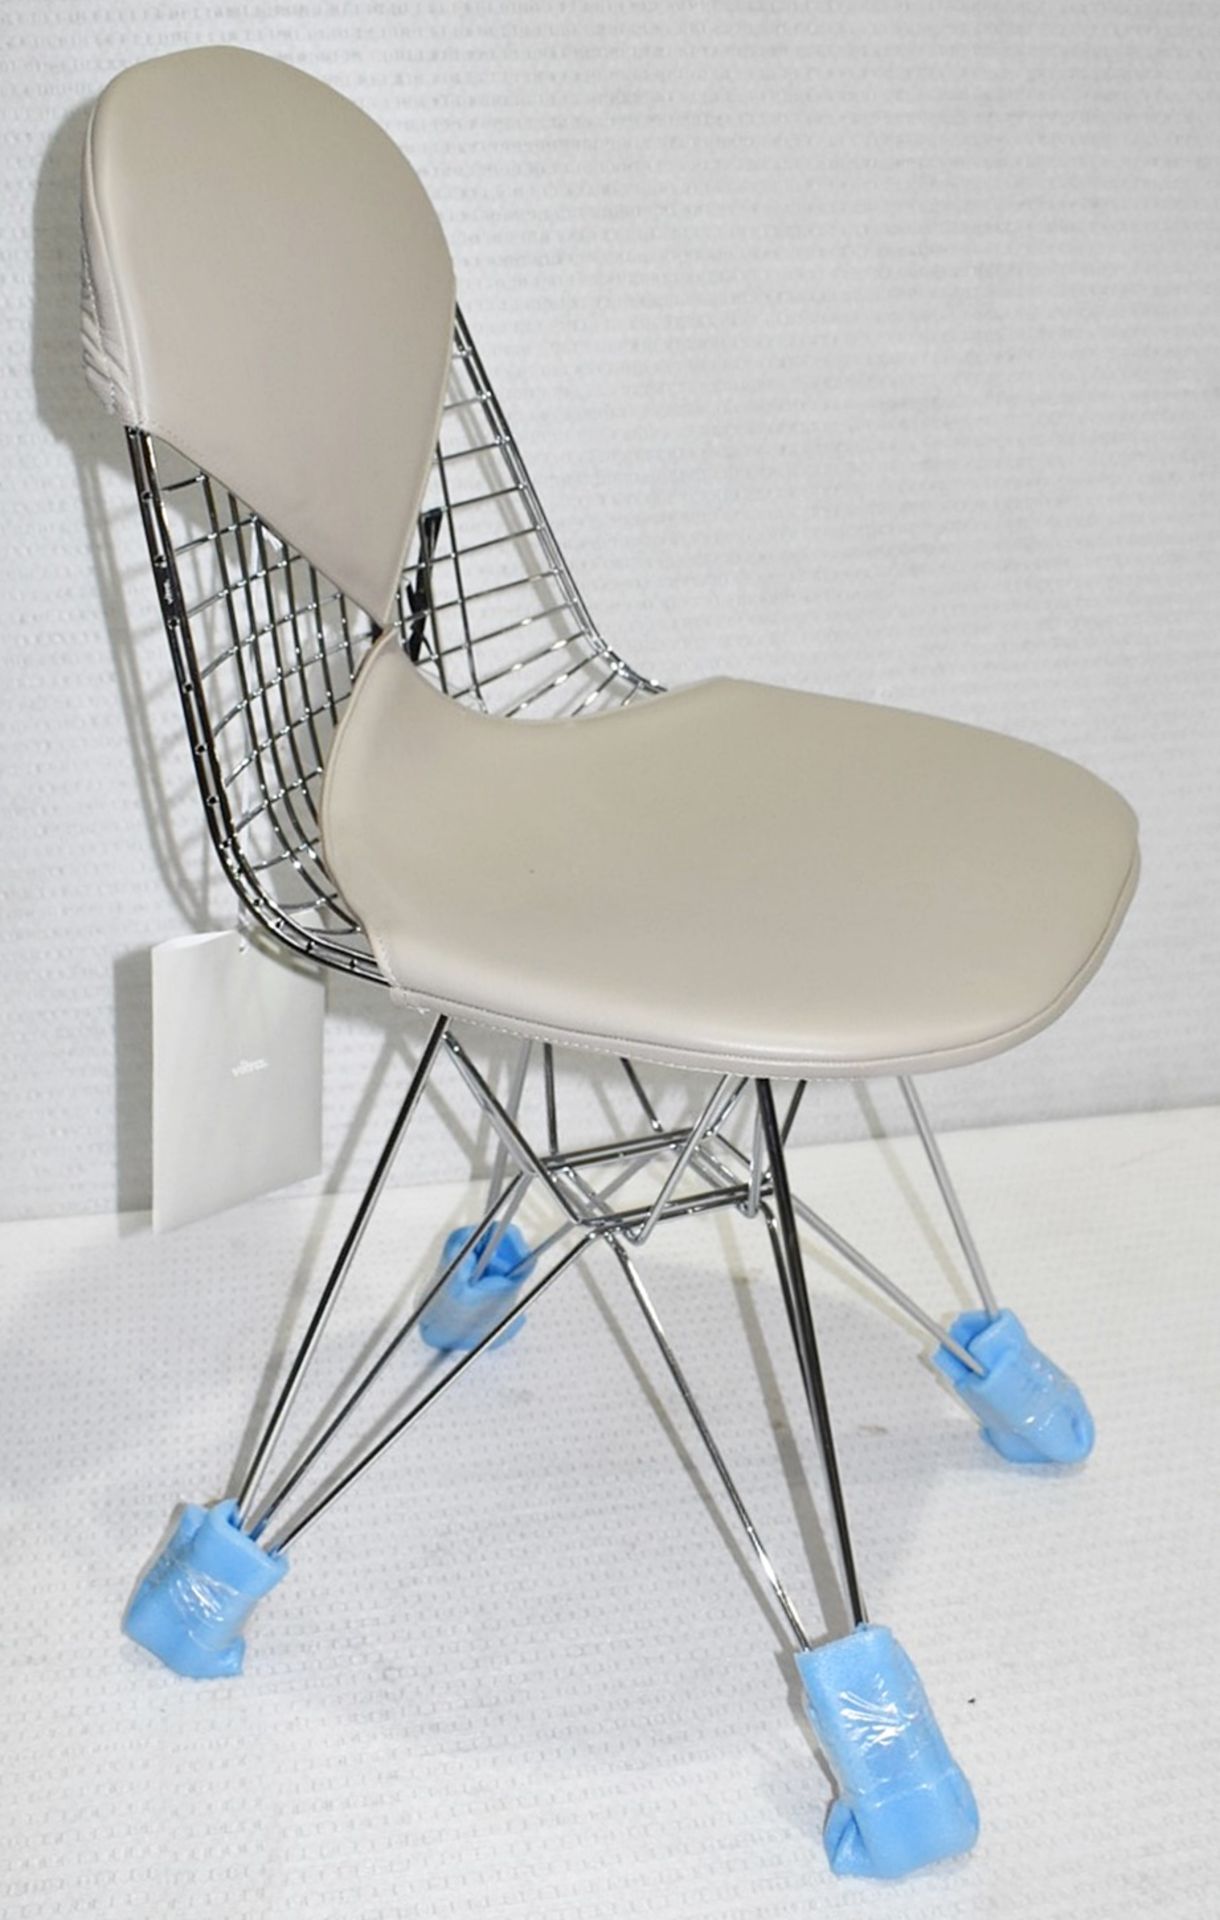 1 x VITRA Eames 'Wire DKR-2' Designer Leather Upholstered Chair in Sand & Chrome - RRP £660.00